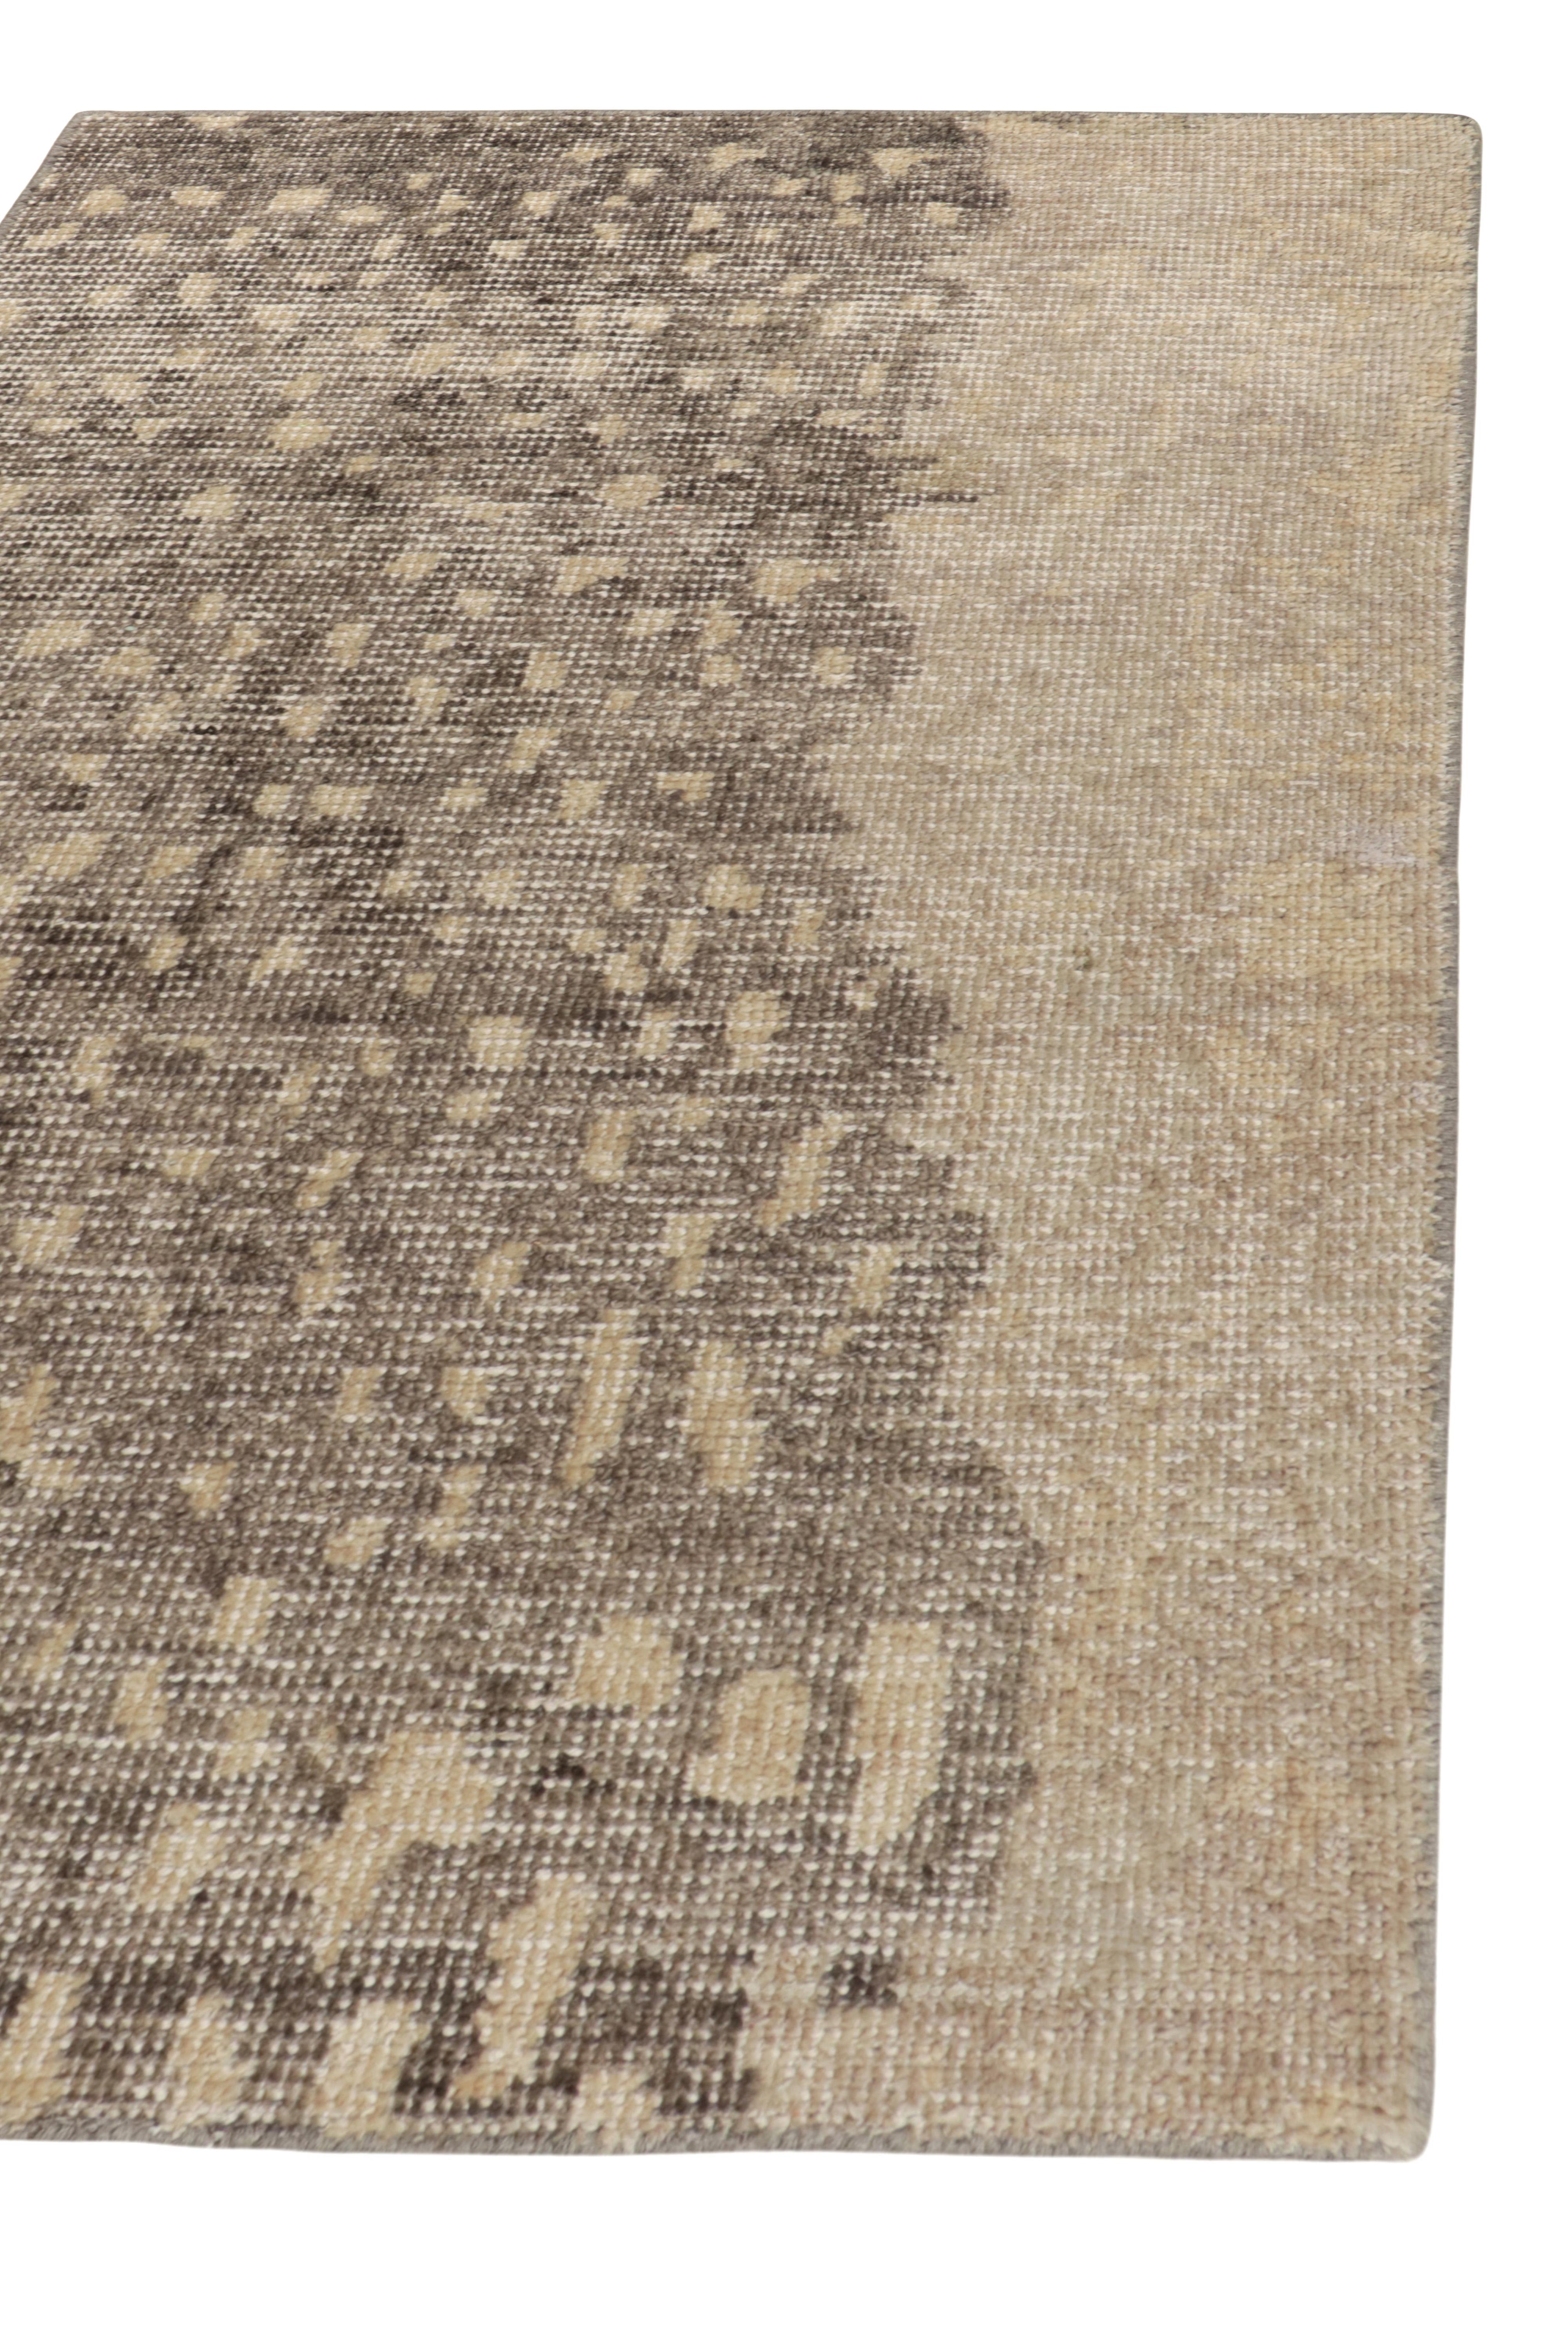 This 2x3 rug hails from the gift-size selections of Rug & Kilim’s Homage Collection, remarking a bold take on distressed style. This design evokes painterly abstract styles in comfortable beige-brown and gray notes, naturally complementing the